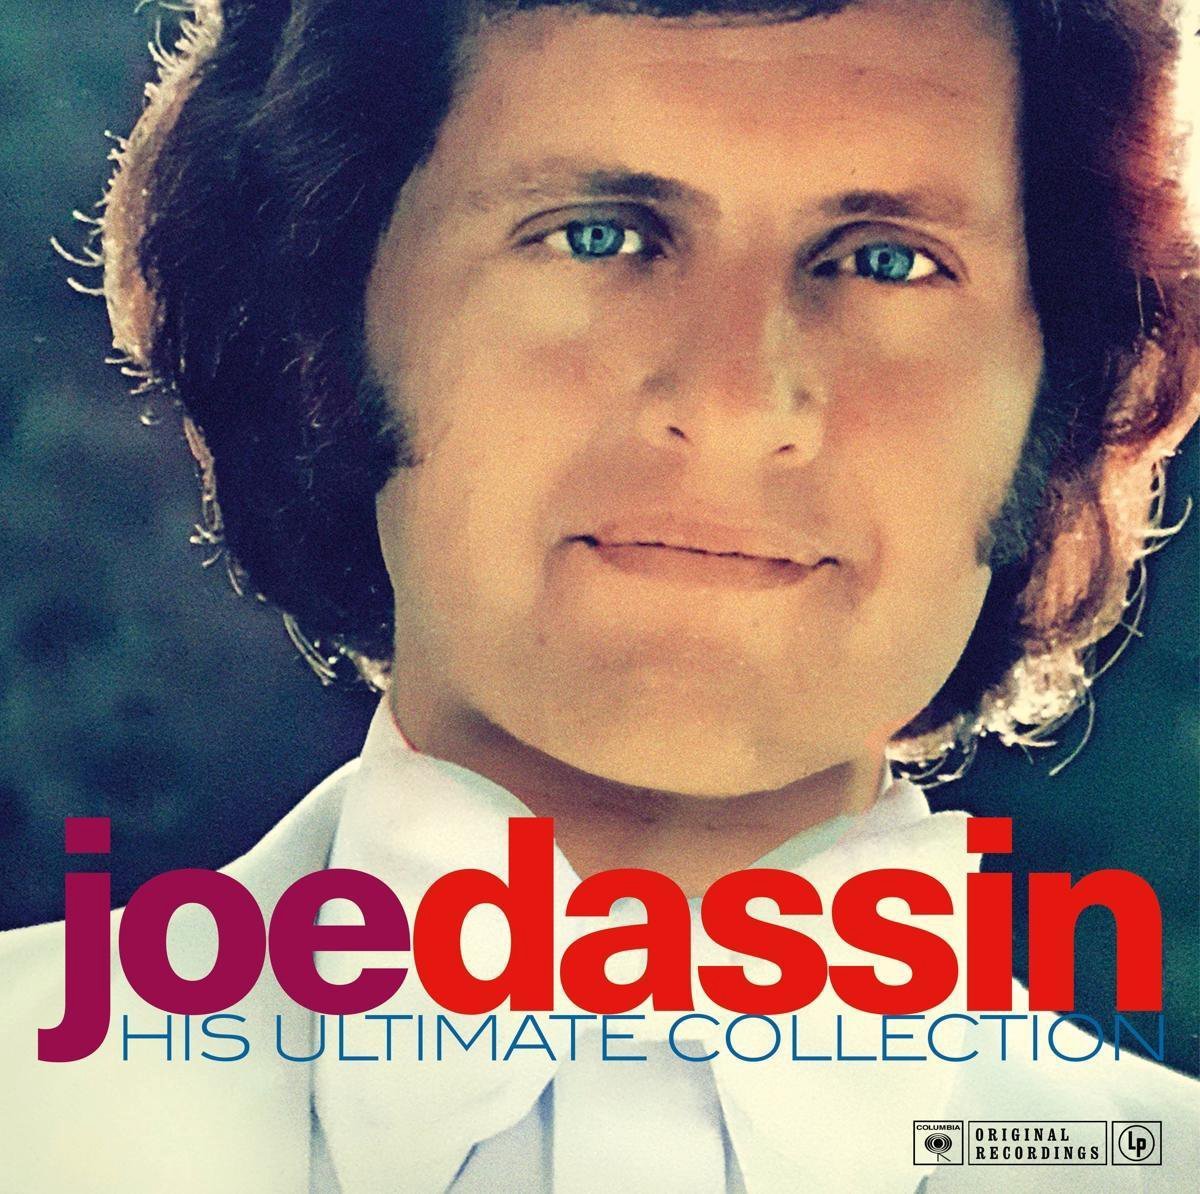 Sony Music Joe Dassin His Ultimate Collection